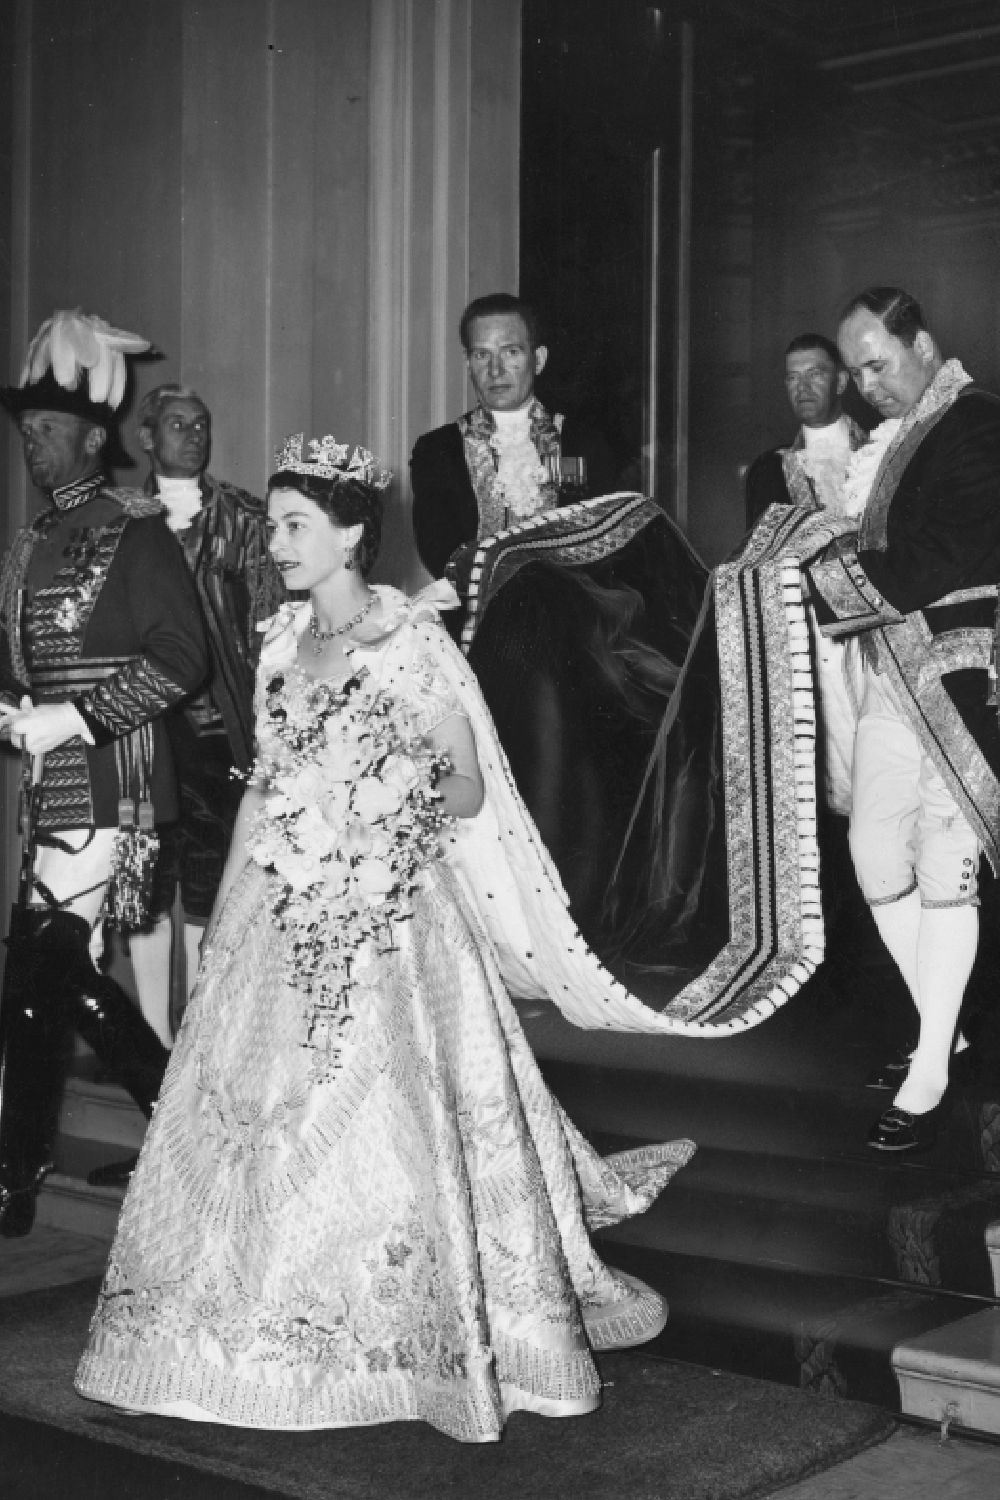 <p>                     Queen Elizabeth's coronation bouquet was seriously impressive, with stunning white flowers representing different parts of the UK. The bouquet consisted of orchids and lilies-of-the-valley from England, stephanotis from Scotland, orchids from Wales, and carnations from Northern Ireland and the Isle of Man.                   </p>